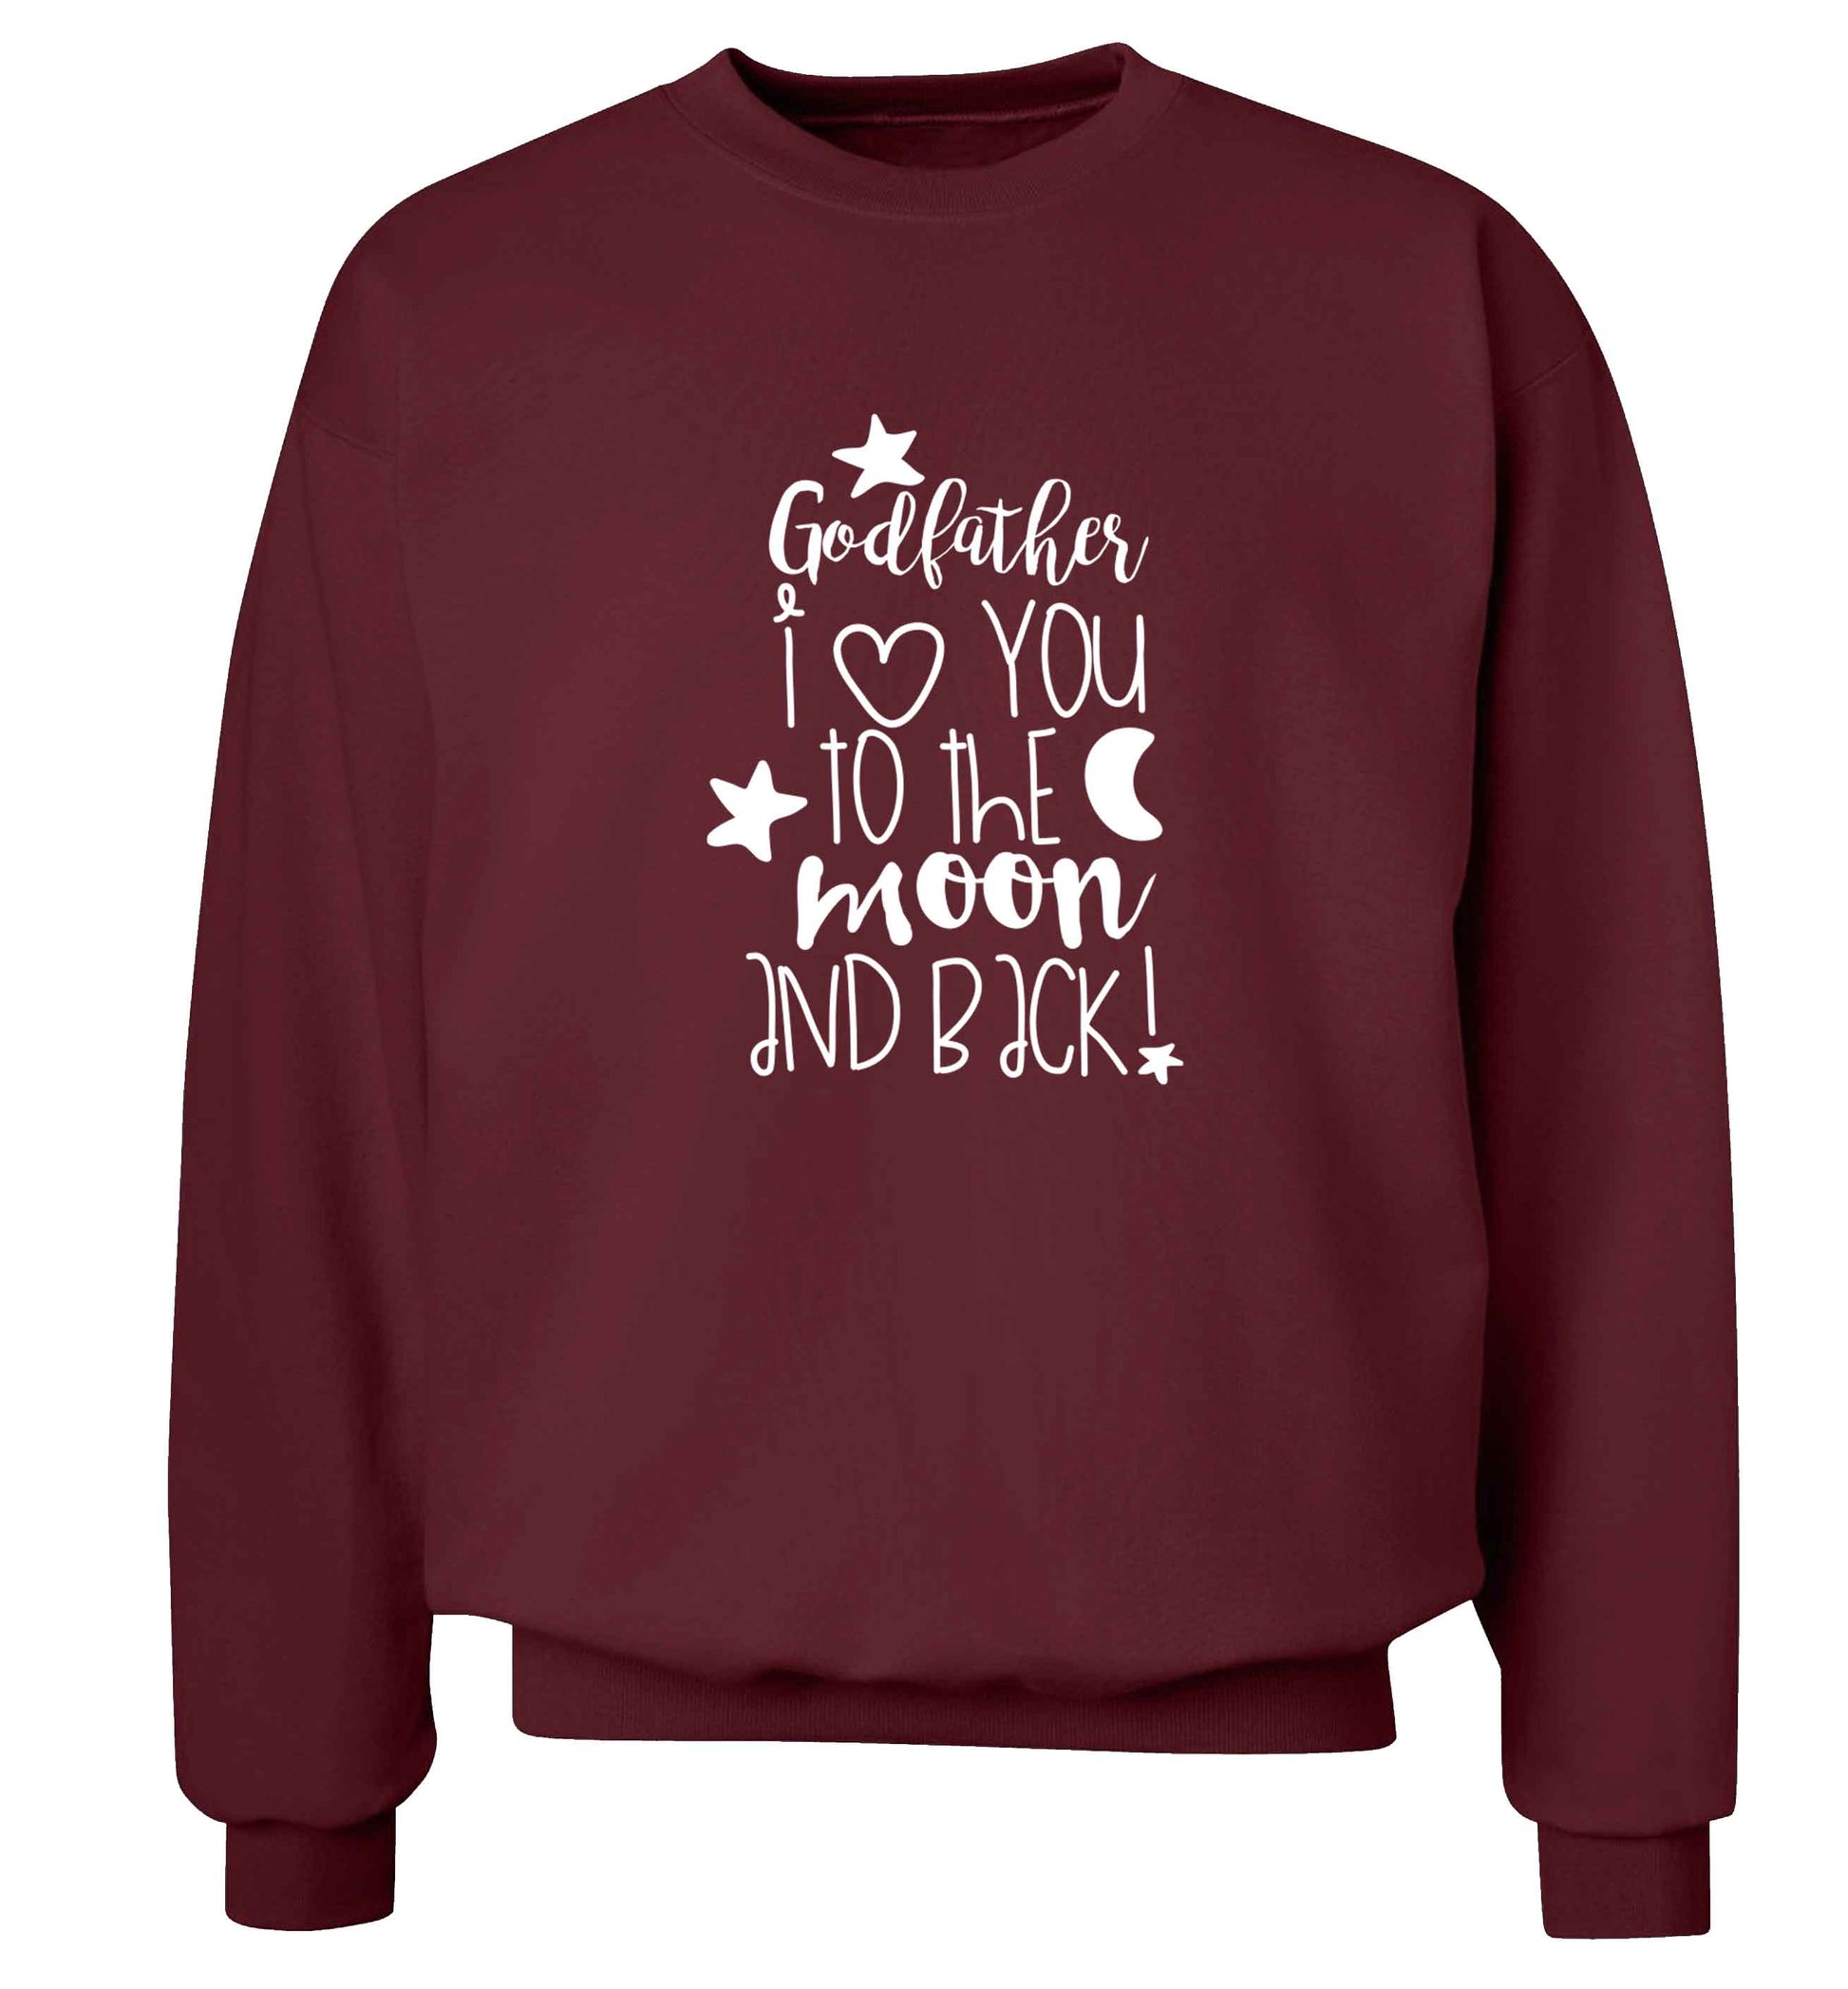 Godfather I love you to the moon and back adult's unisex maroon sweater 2XL